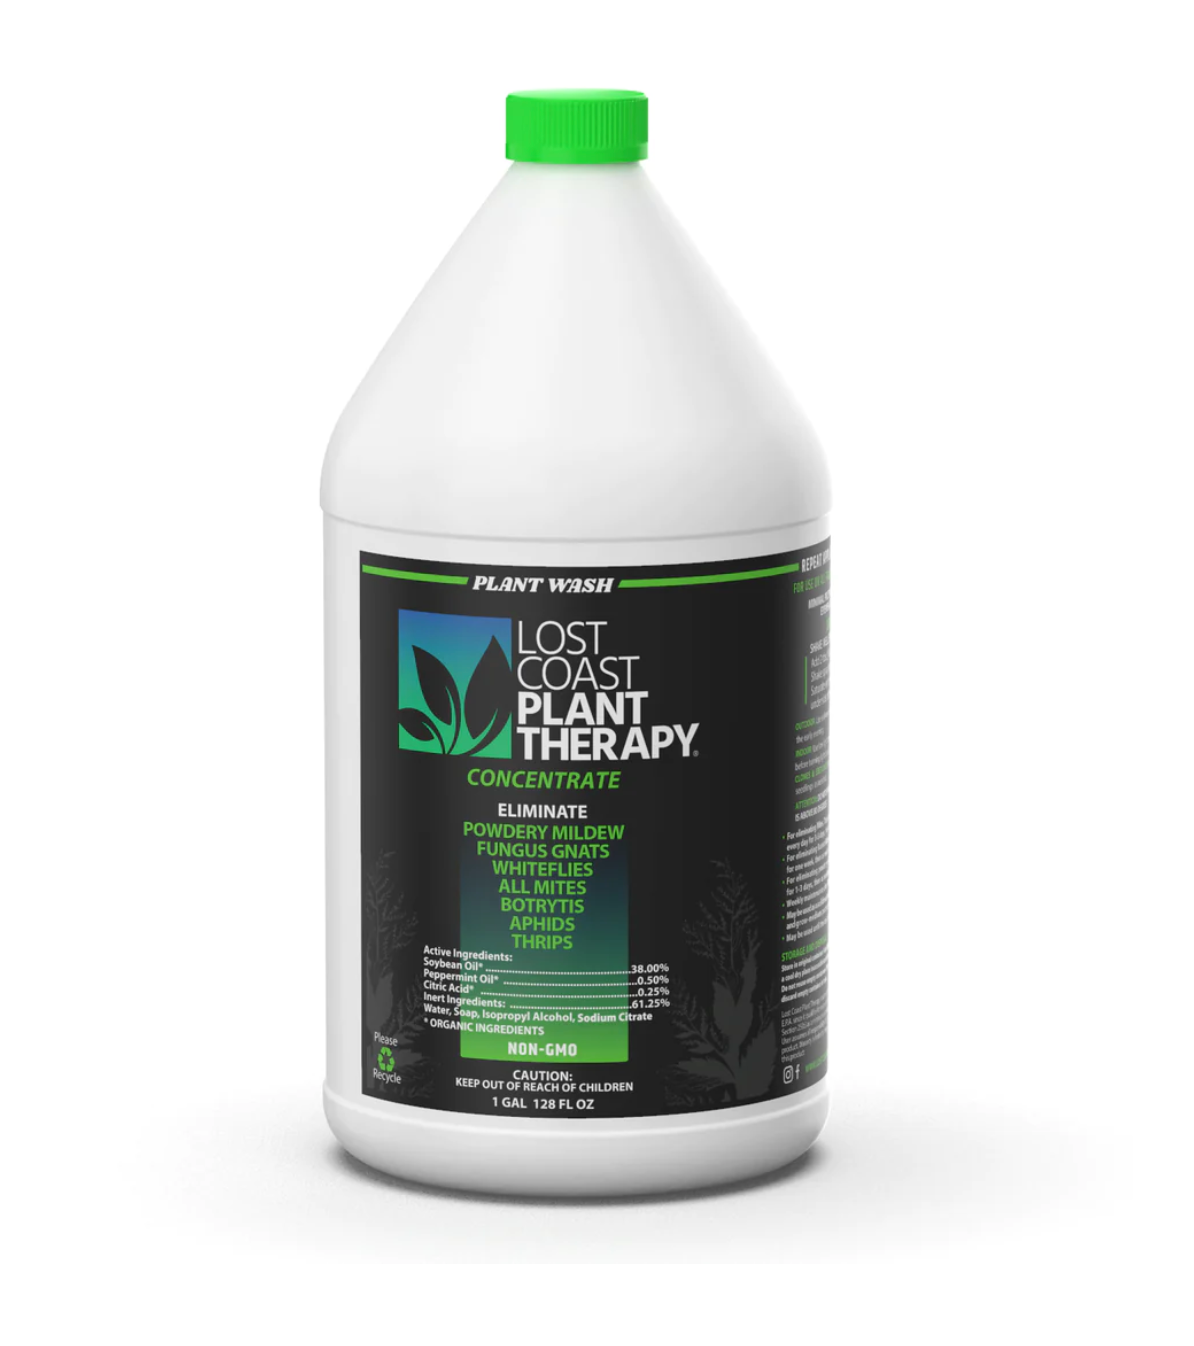 Lost Coast Plant Therapy Concentrate